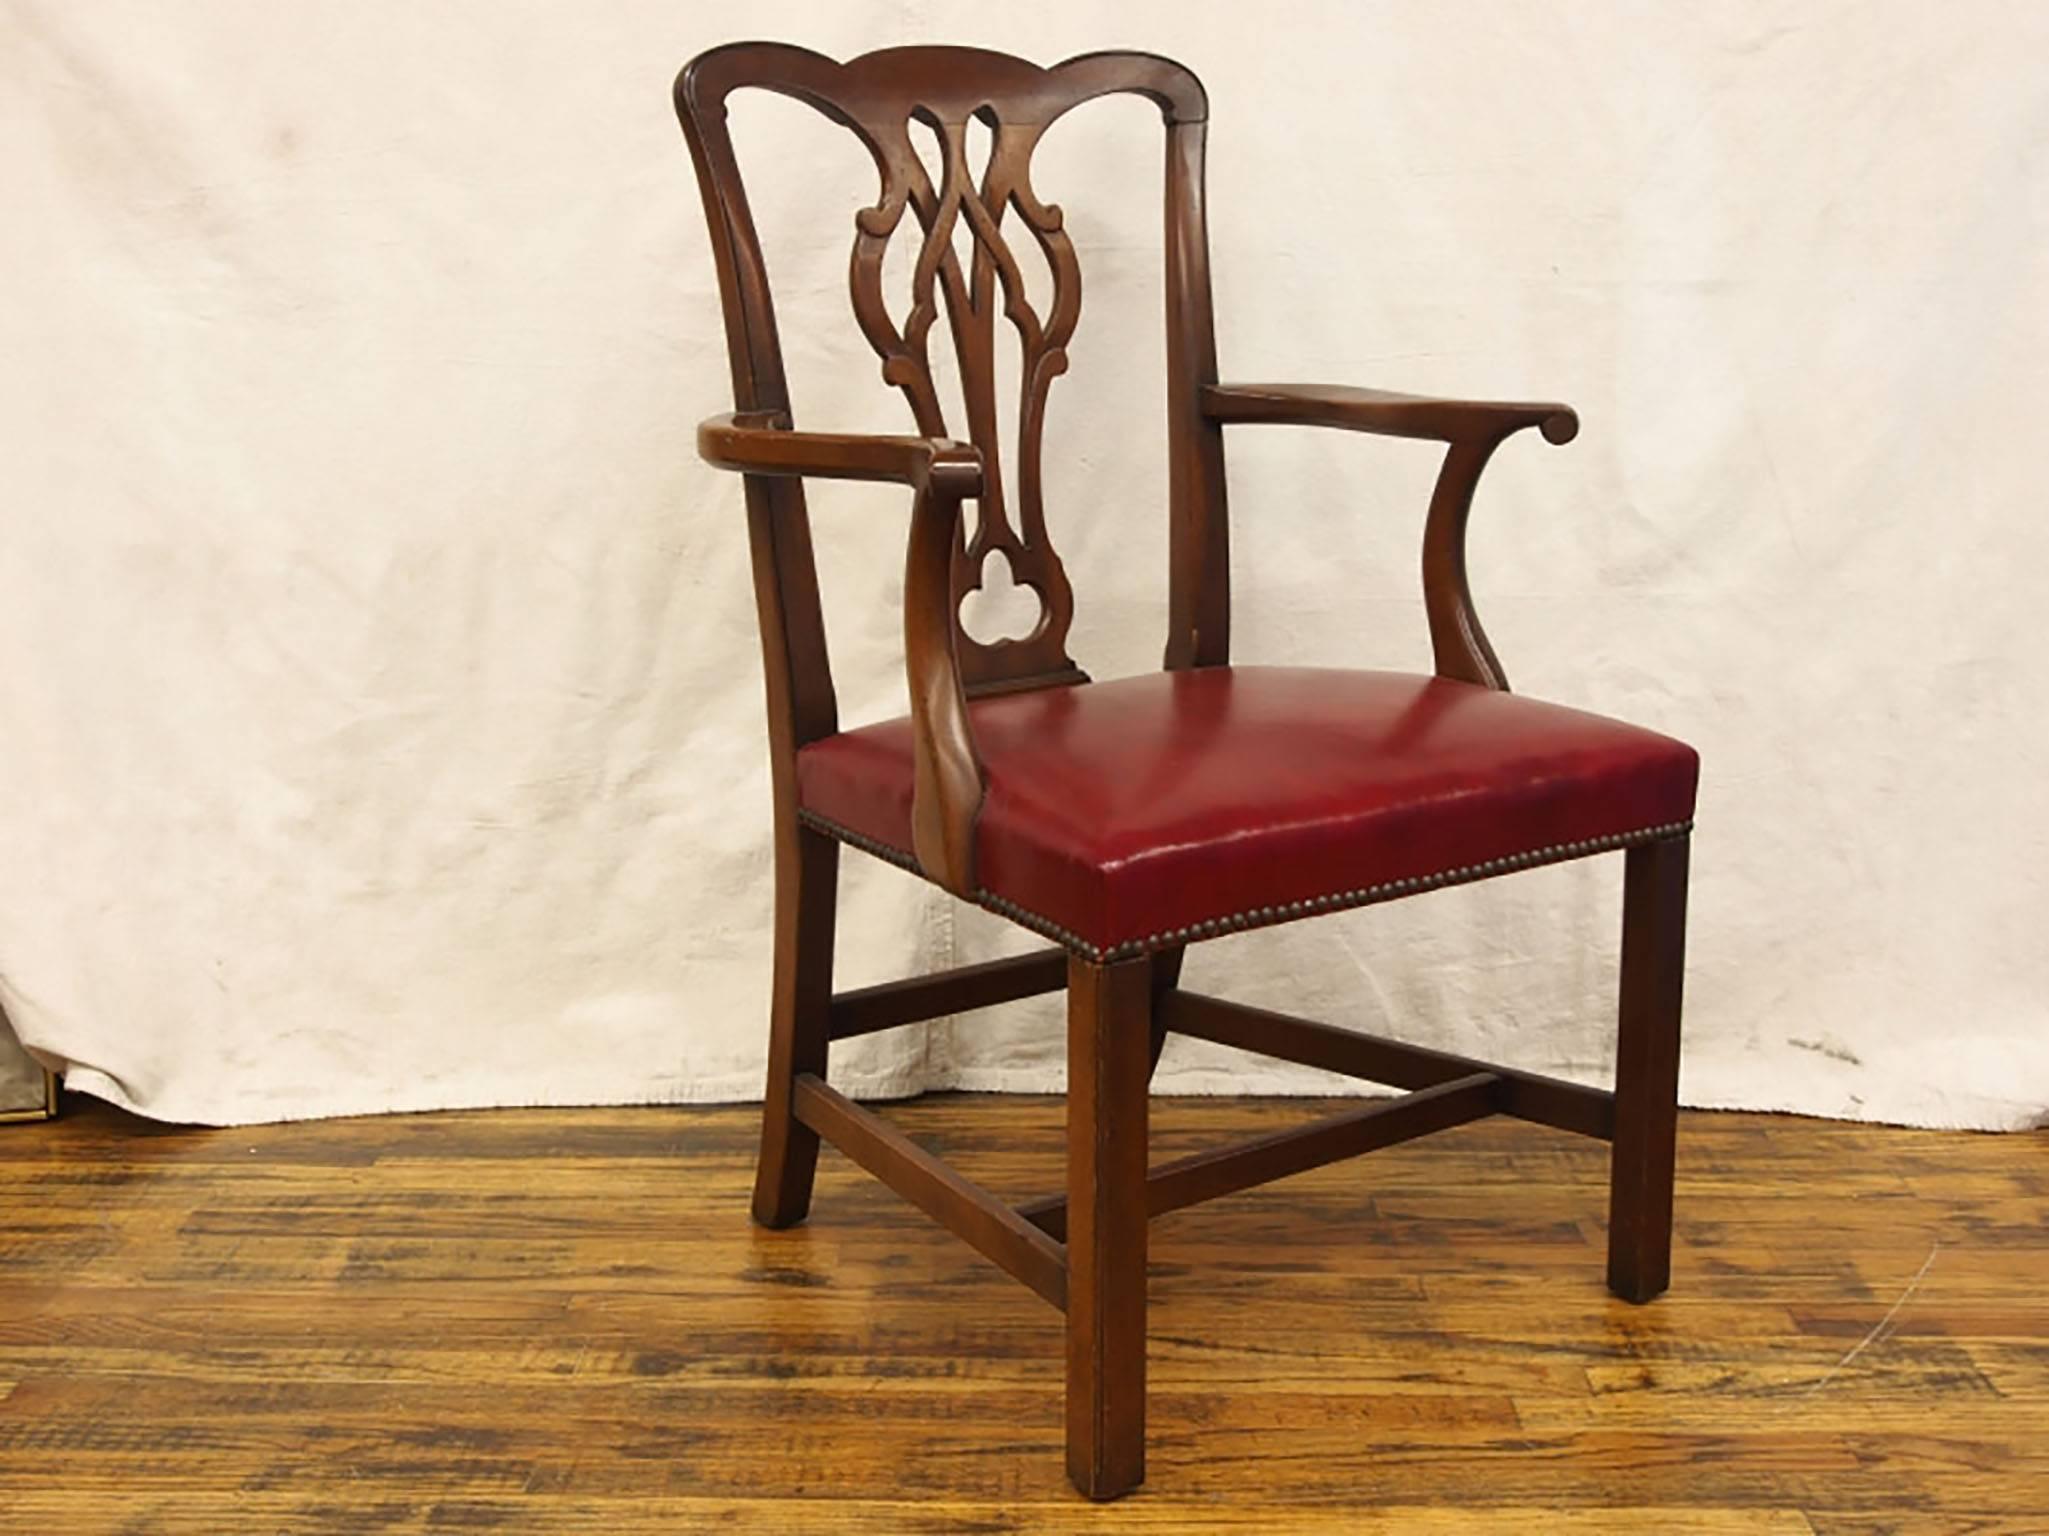 An outstanding set of Mid-Century English style solid mahogany frame dining chairs in very good condition, made by Kittinger. The seats retain their original vibrant red glazed leather style vinyl seats and have brass nailhead trim surround. Two